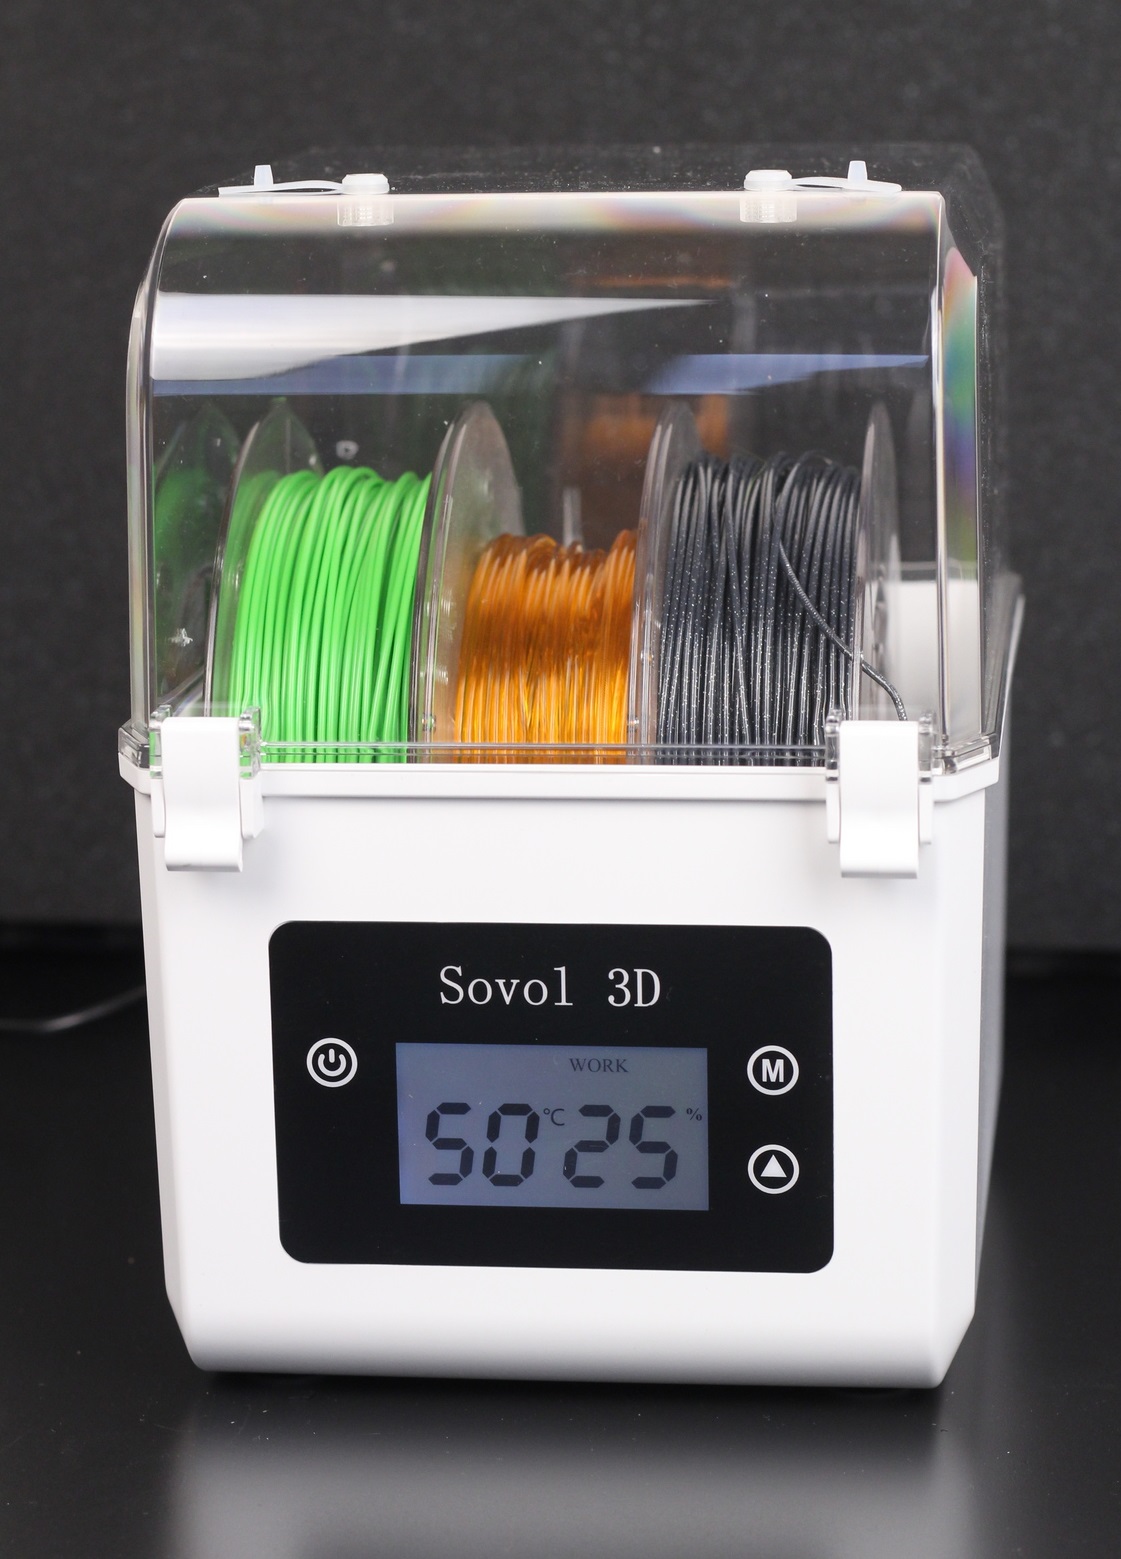 Sovol Filament Drier 6 hour results 1 | Sovol Filament Dryer Review: Does it really work?